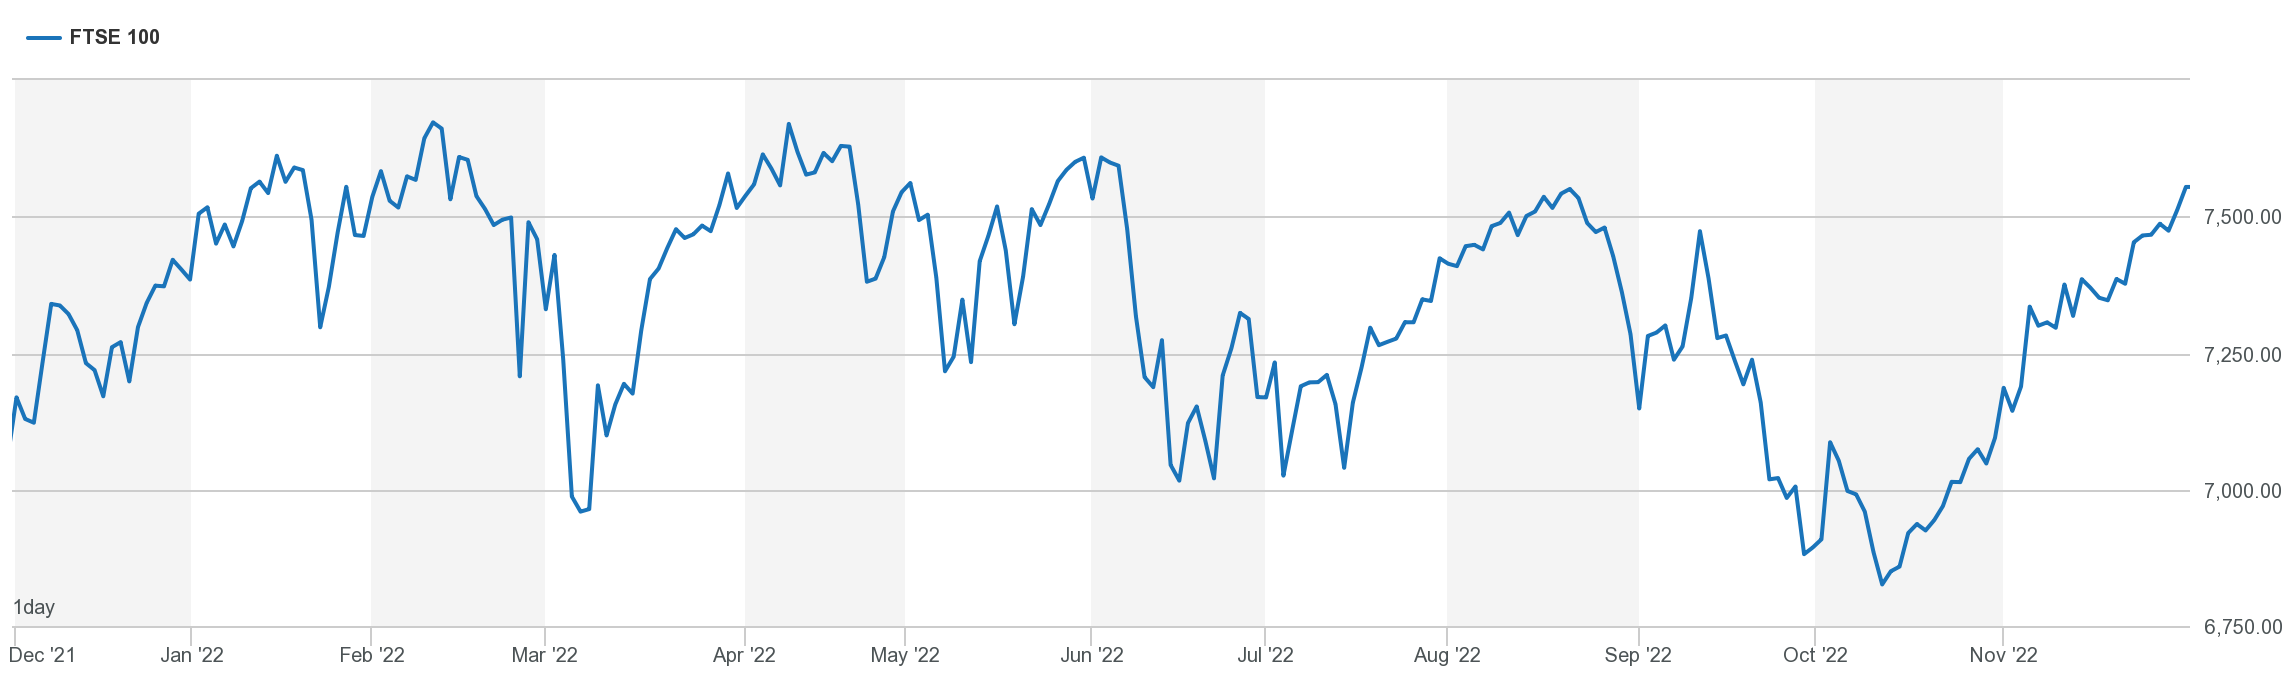 An example of discrete data from the FTSE 100.